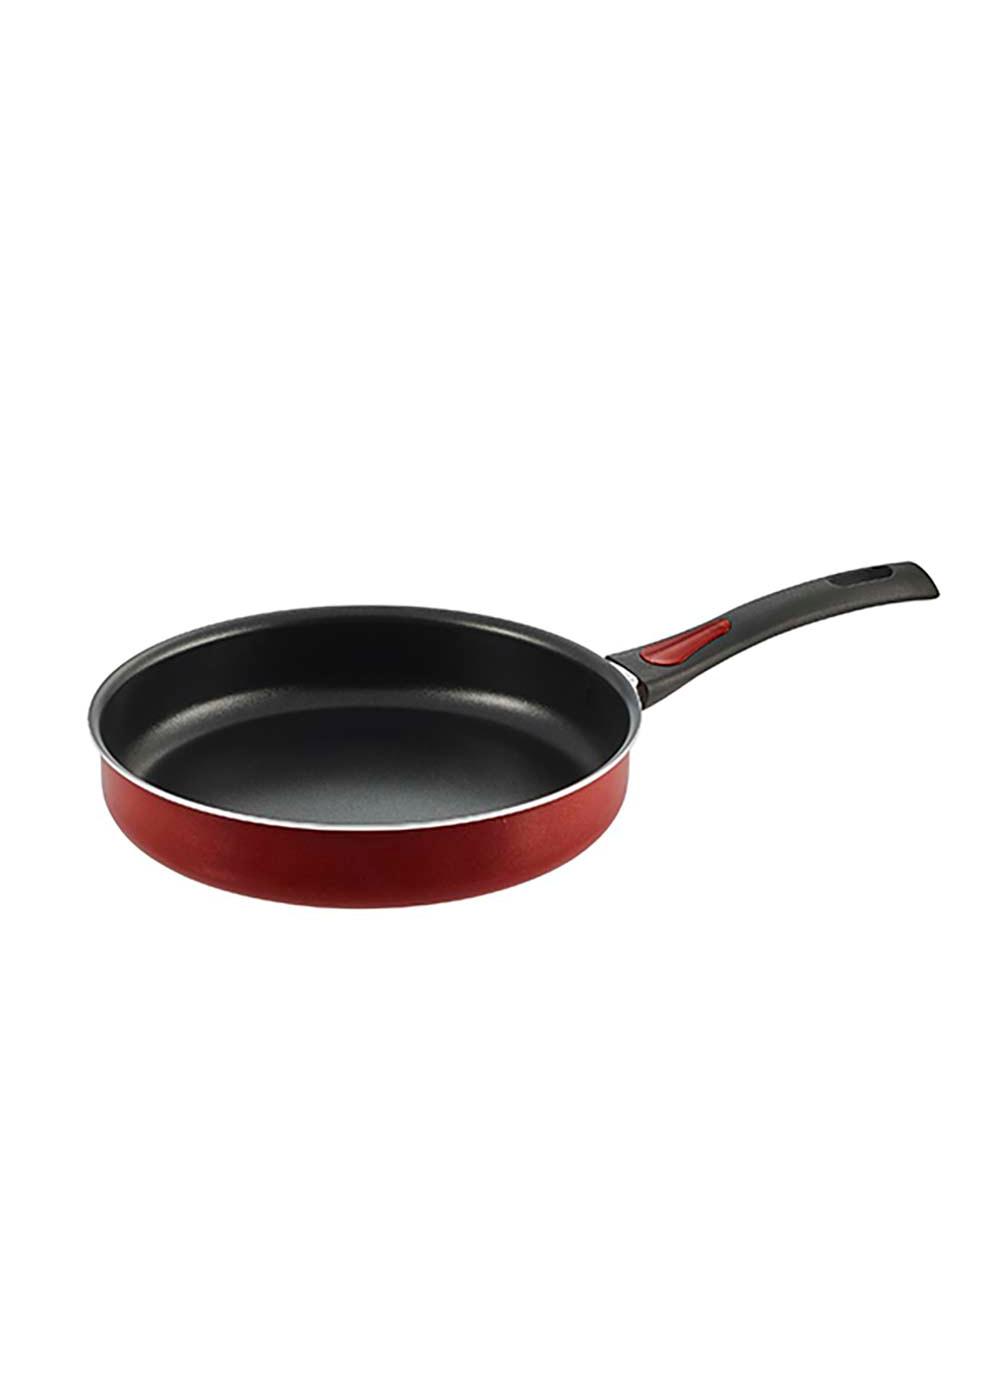 Tramontina Non-Stick Red Cookware Set; image 14 of 14